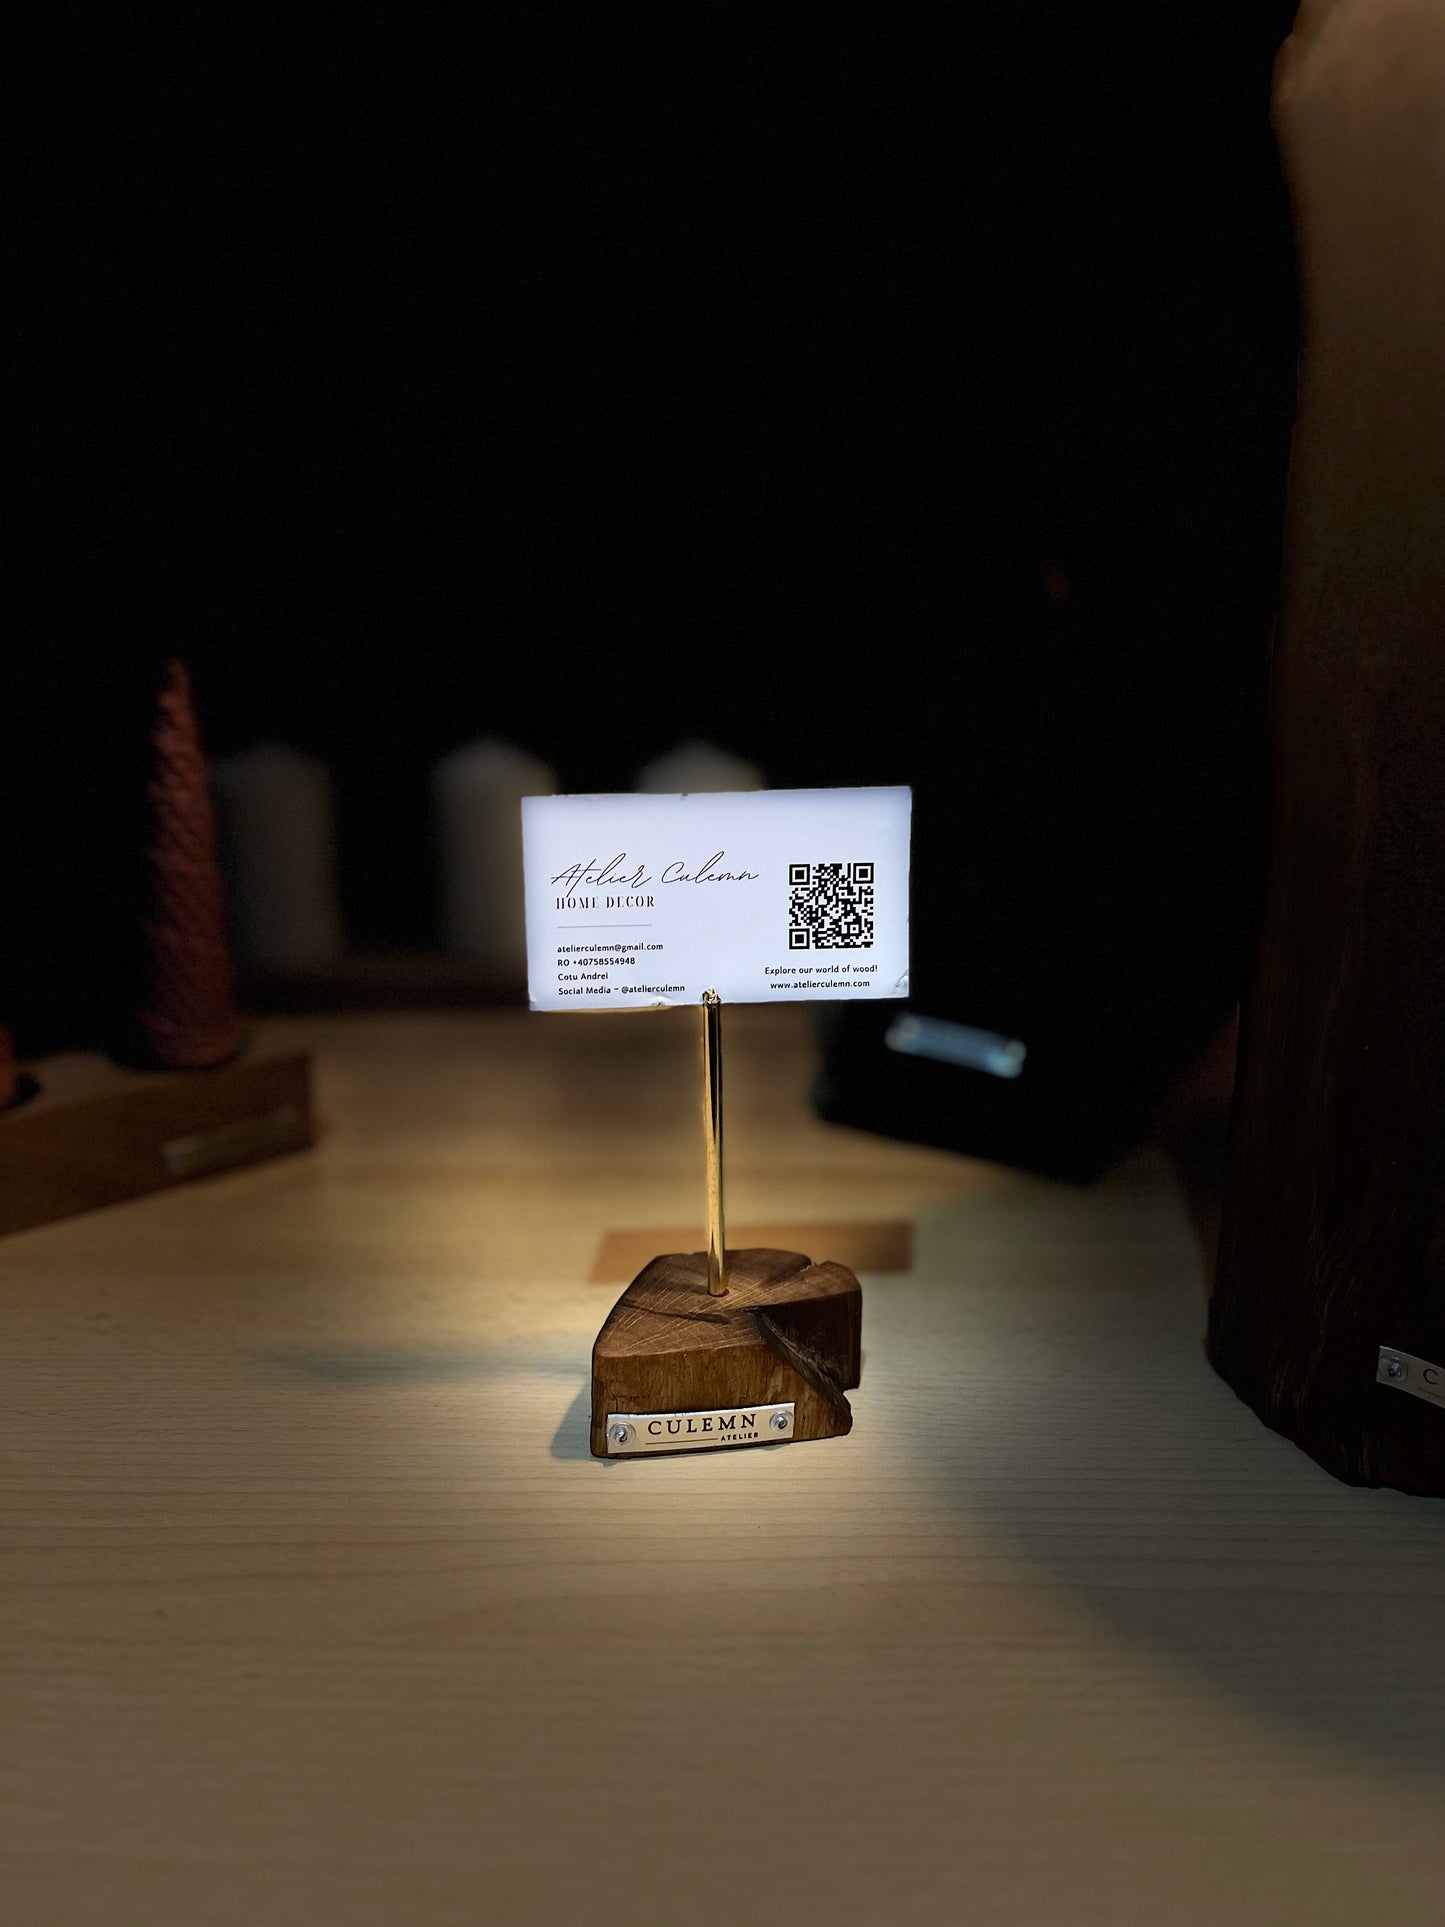 Price support, notes or business cards made of HEY wood